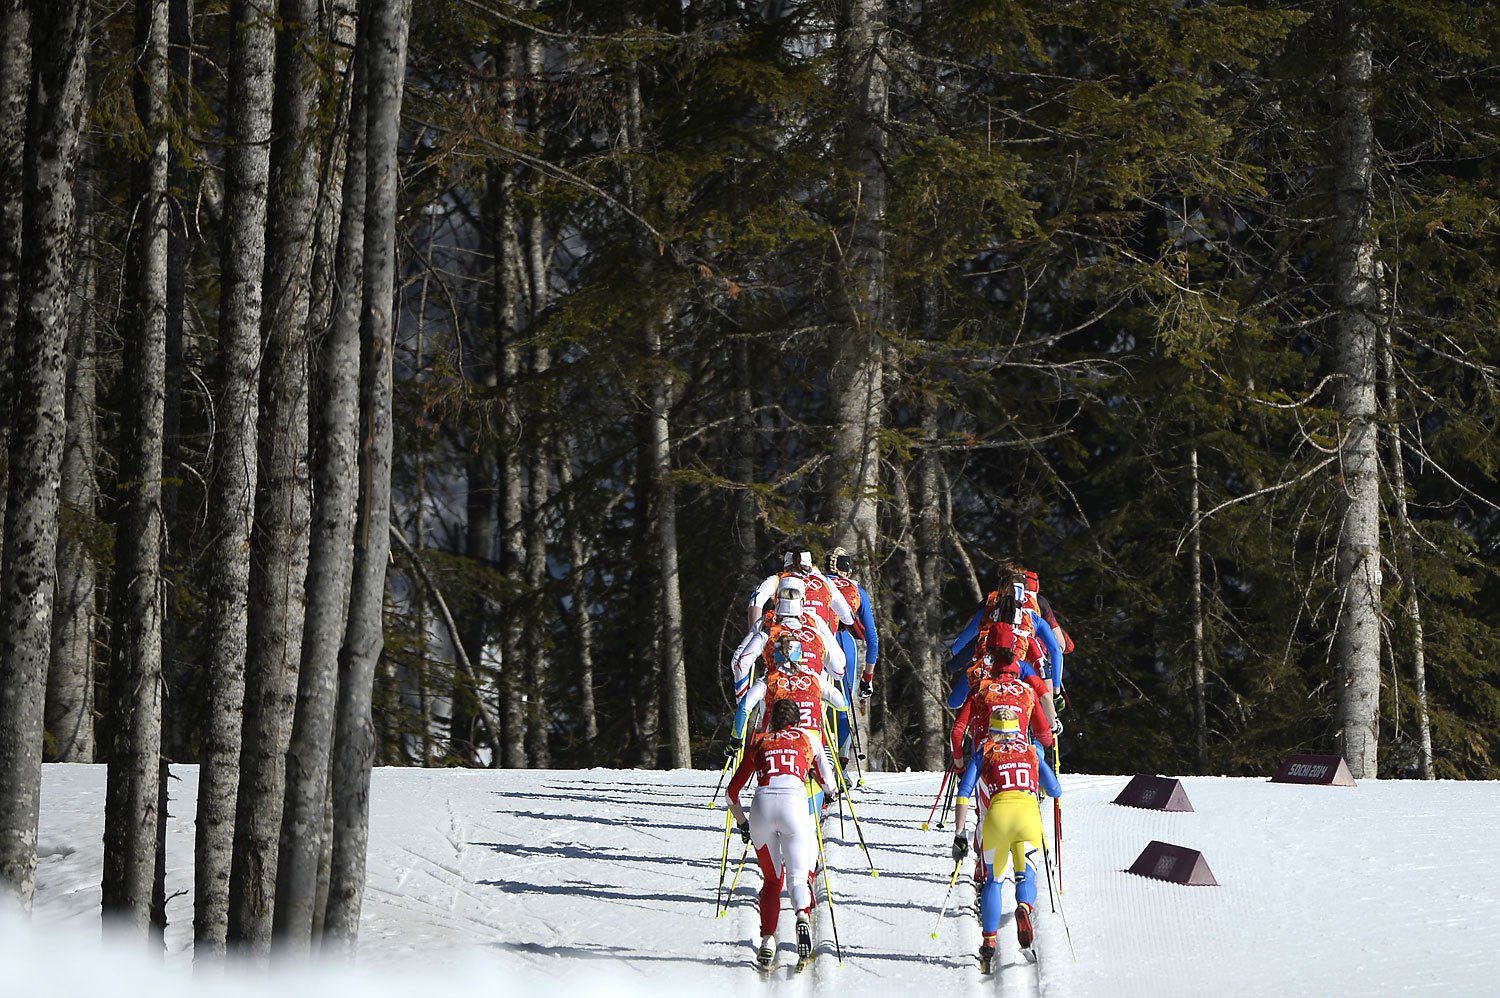 Athletes compete in the Women's Cross-Country Skiing 4x5km Relay at the Laura Cross-Country Ski and Biathlon Center during the Sochi Winter Olympics on February 15, 2014, in Rosa Khutor, near Sochi. AFP PHOTO / PIERRE-PHILIPPE MARCOU (Photo credit should read PIERRE-PHILIPPE MARCOU/AFP/Getty Images)